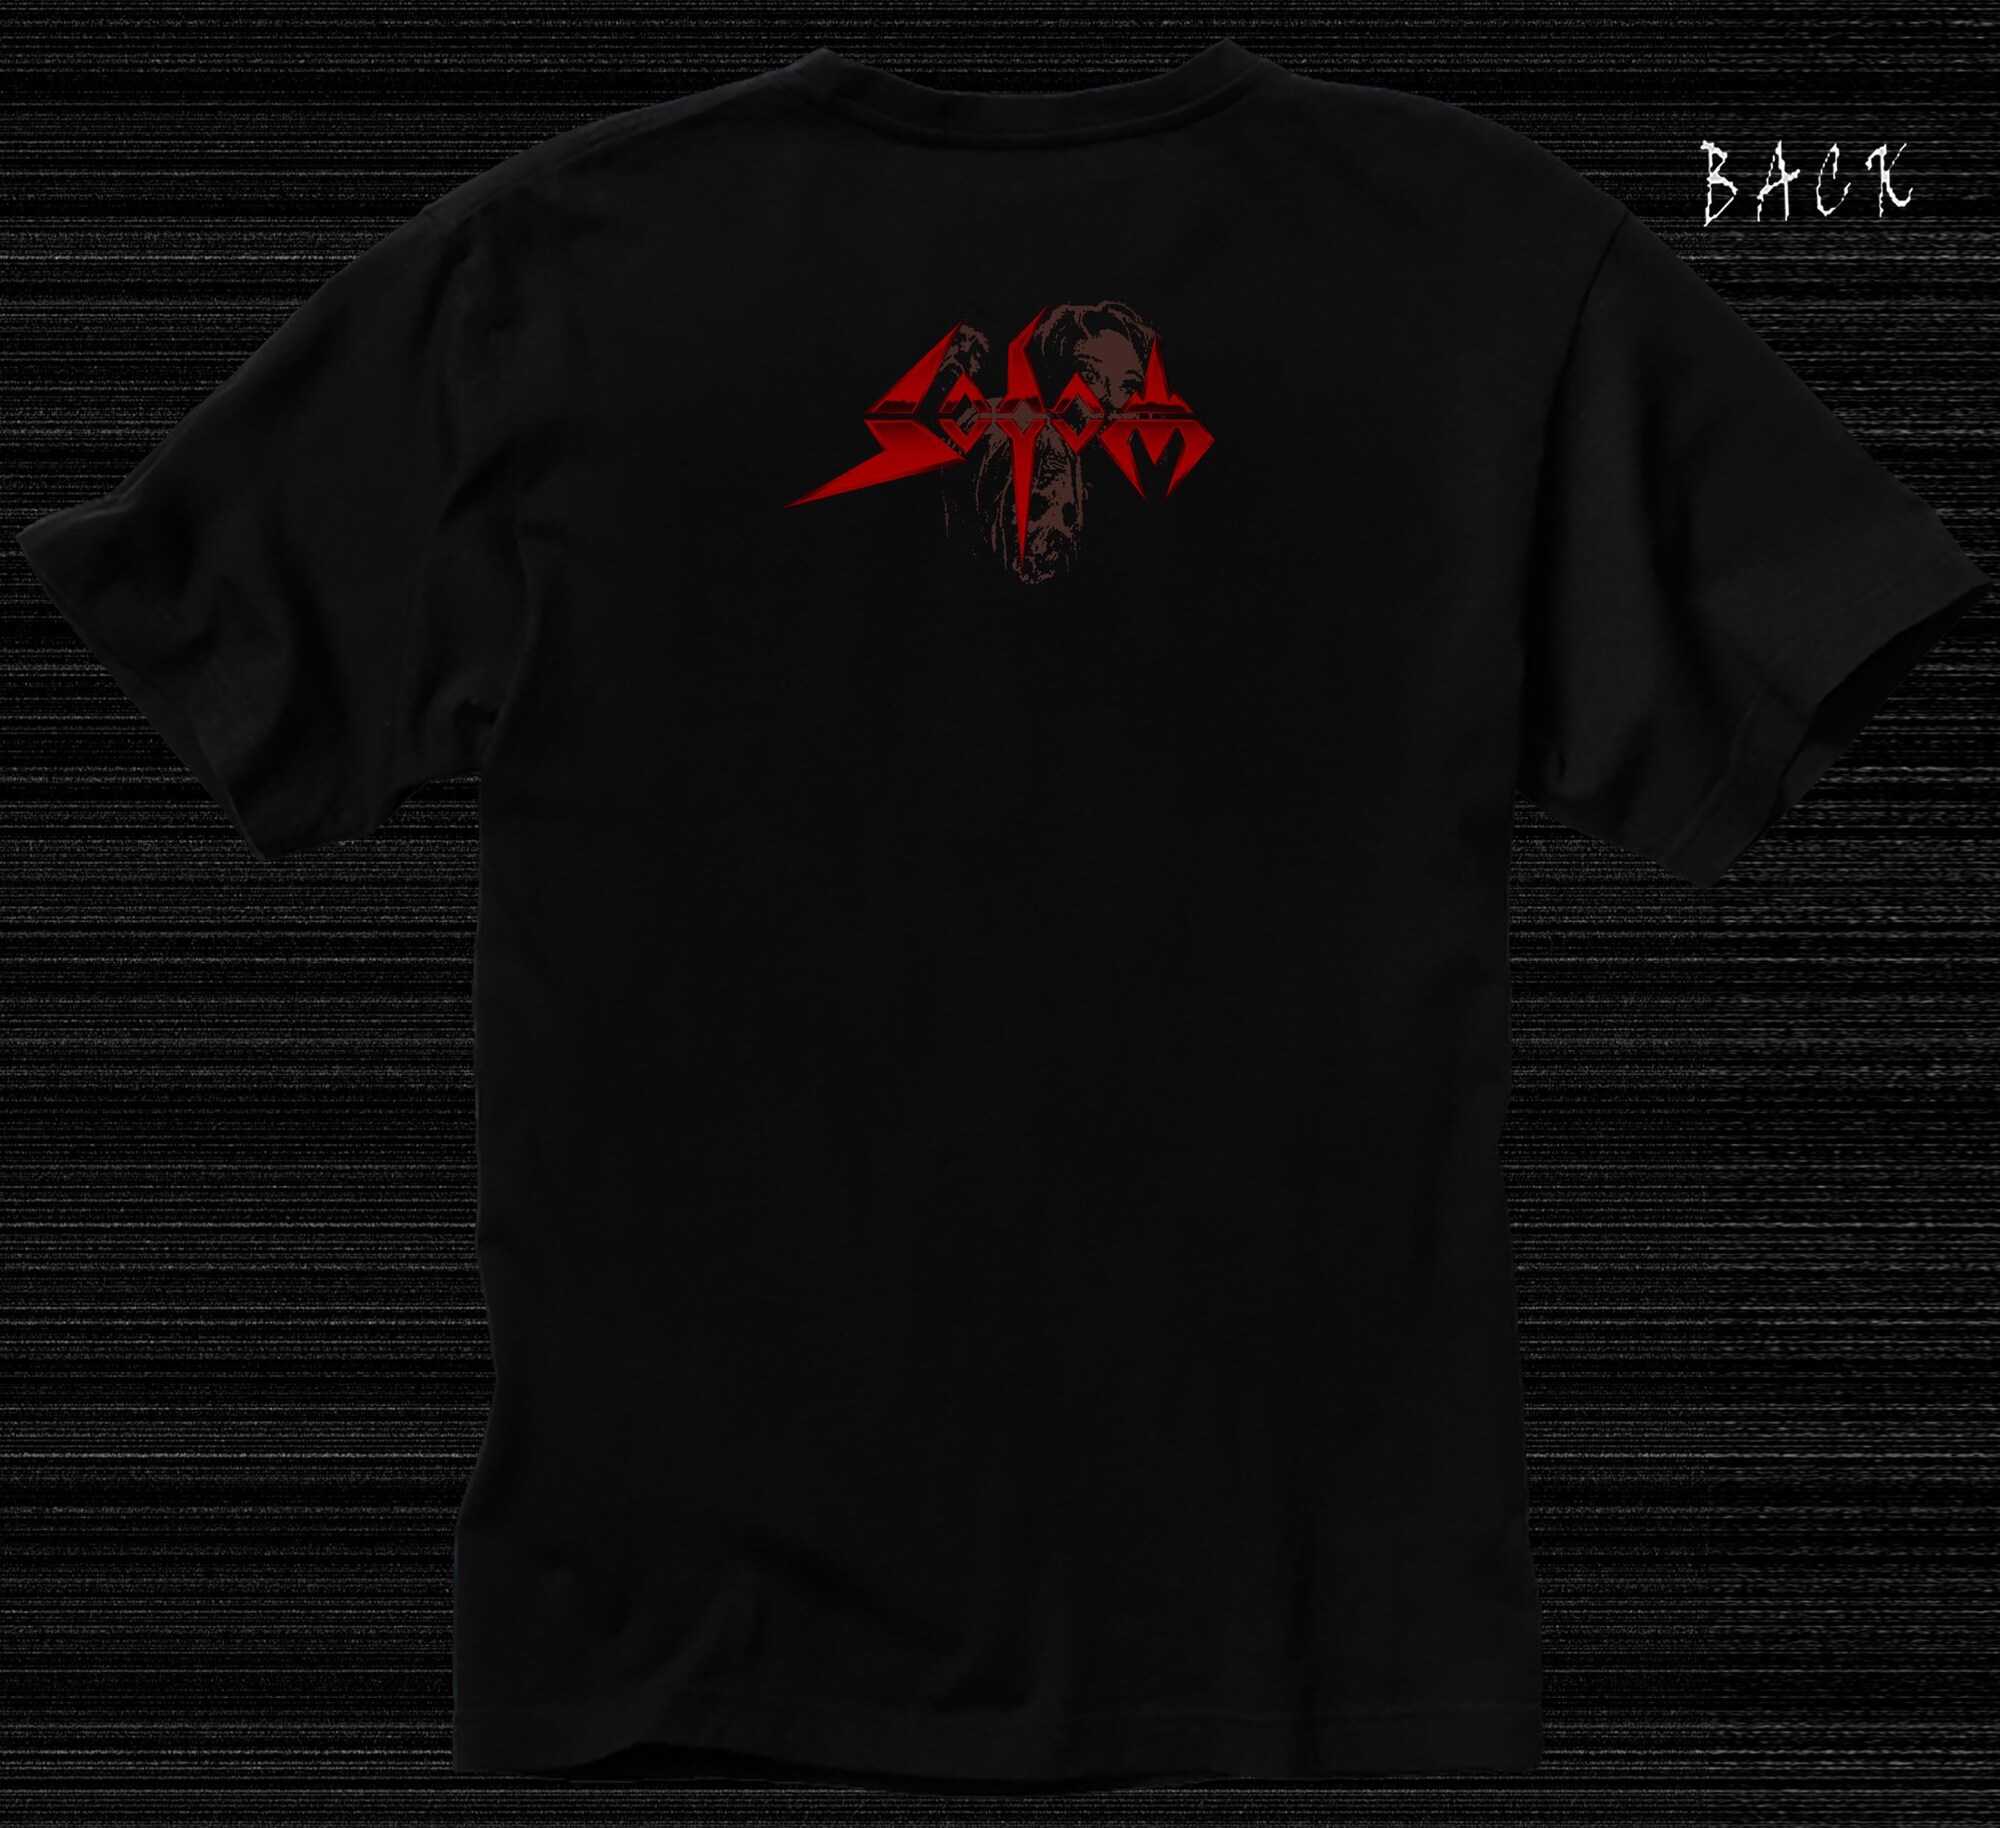 SODOM - The Final Sign Of Evil t-shirt